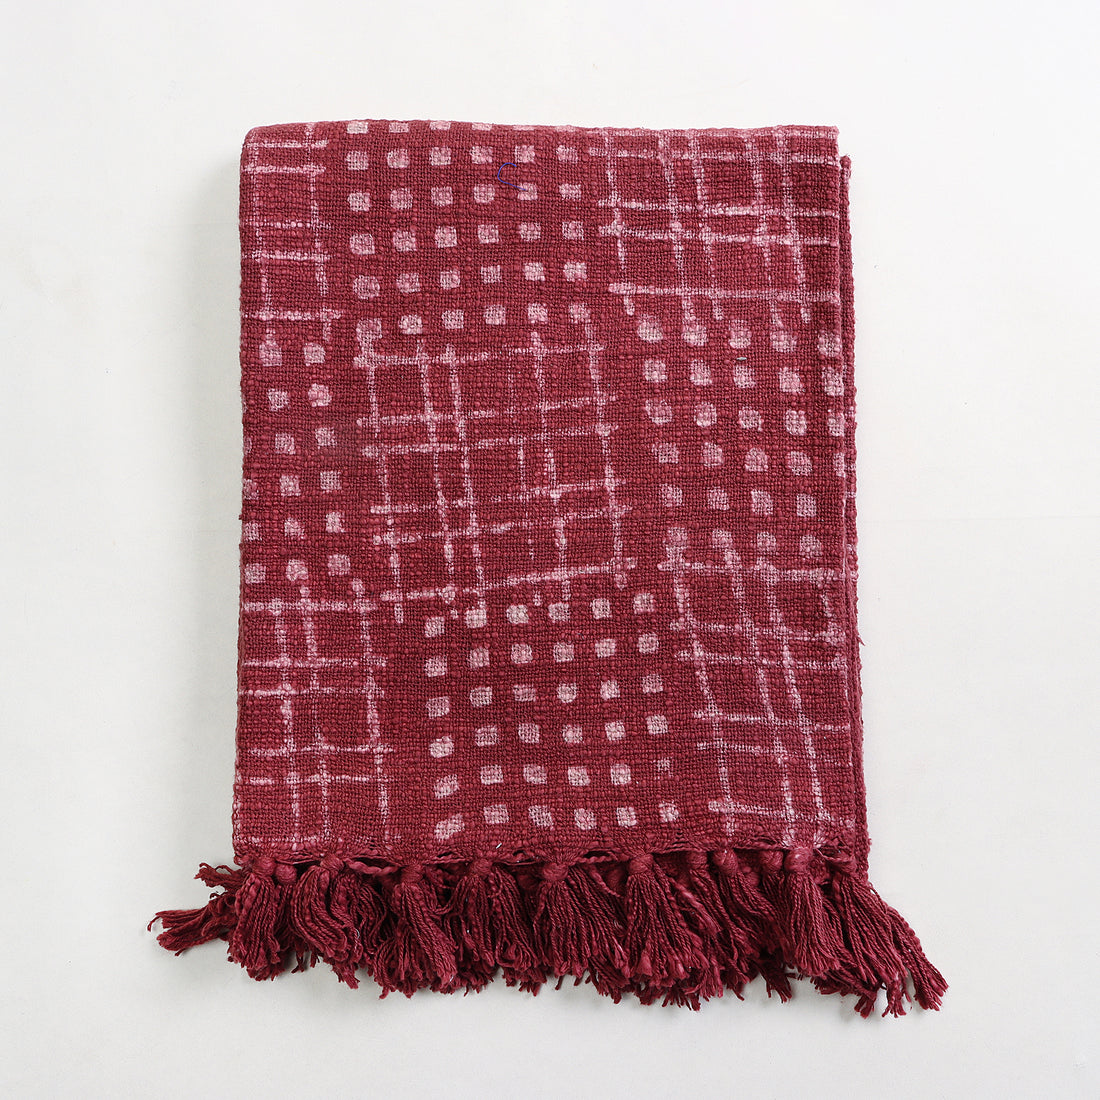 New Maroon Color Soft Cotton Cozy Throws Blankets For Home Decor